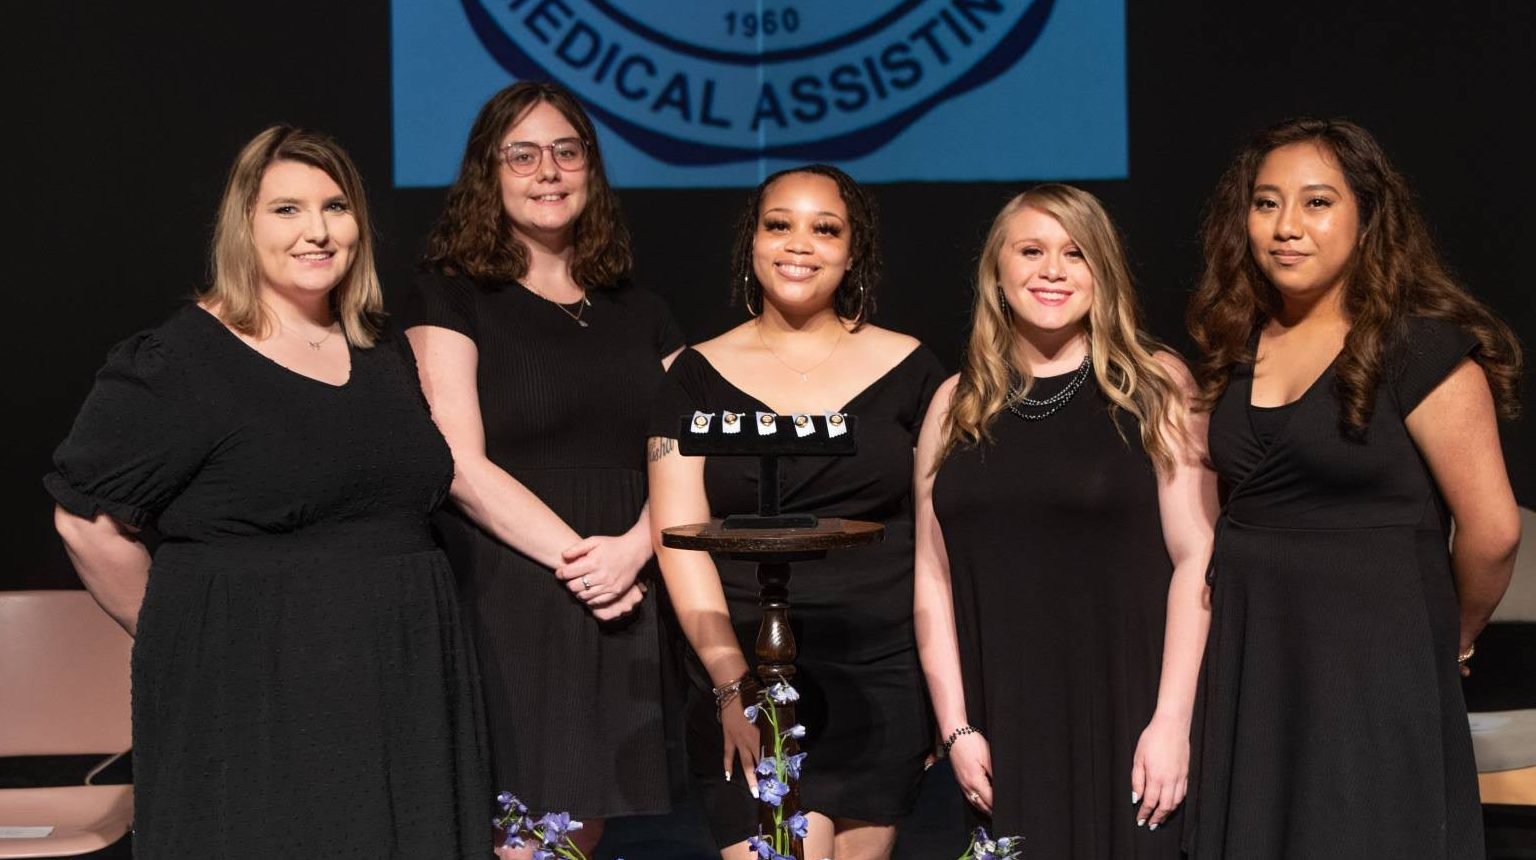 Five graduate from Medical Assisting program at College of the Albemarle